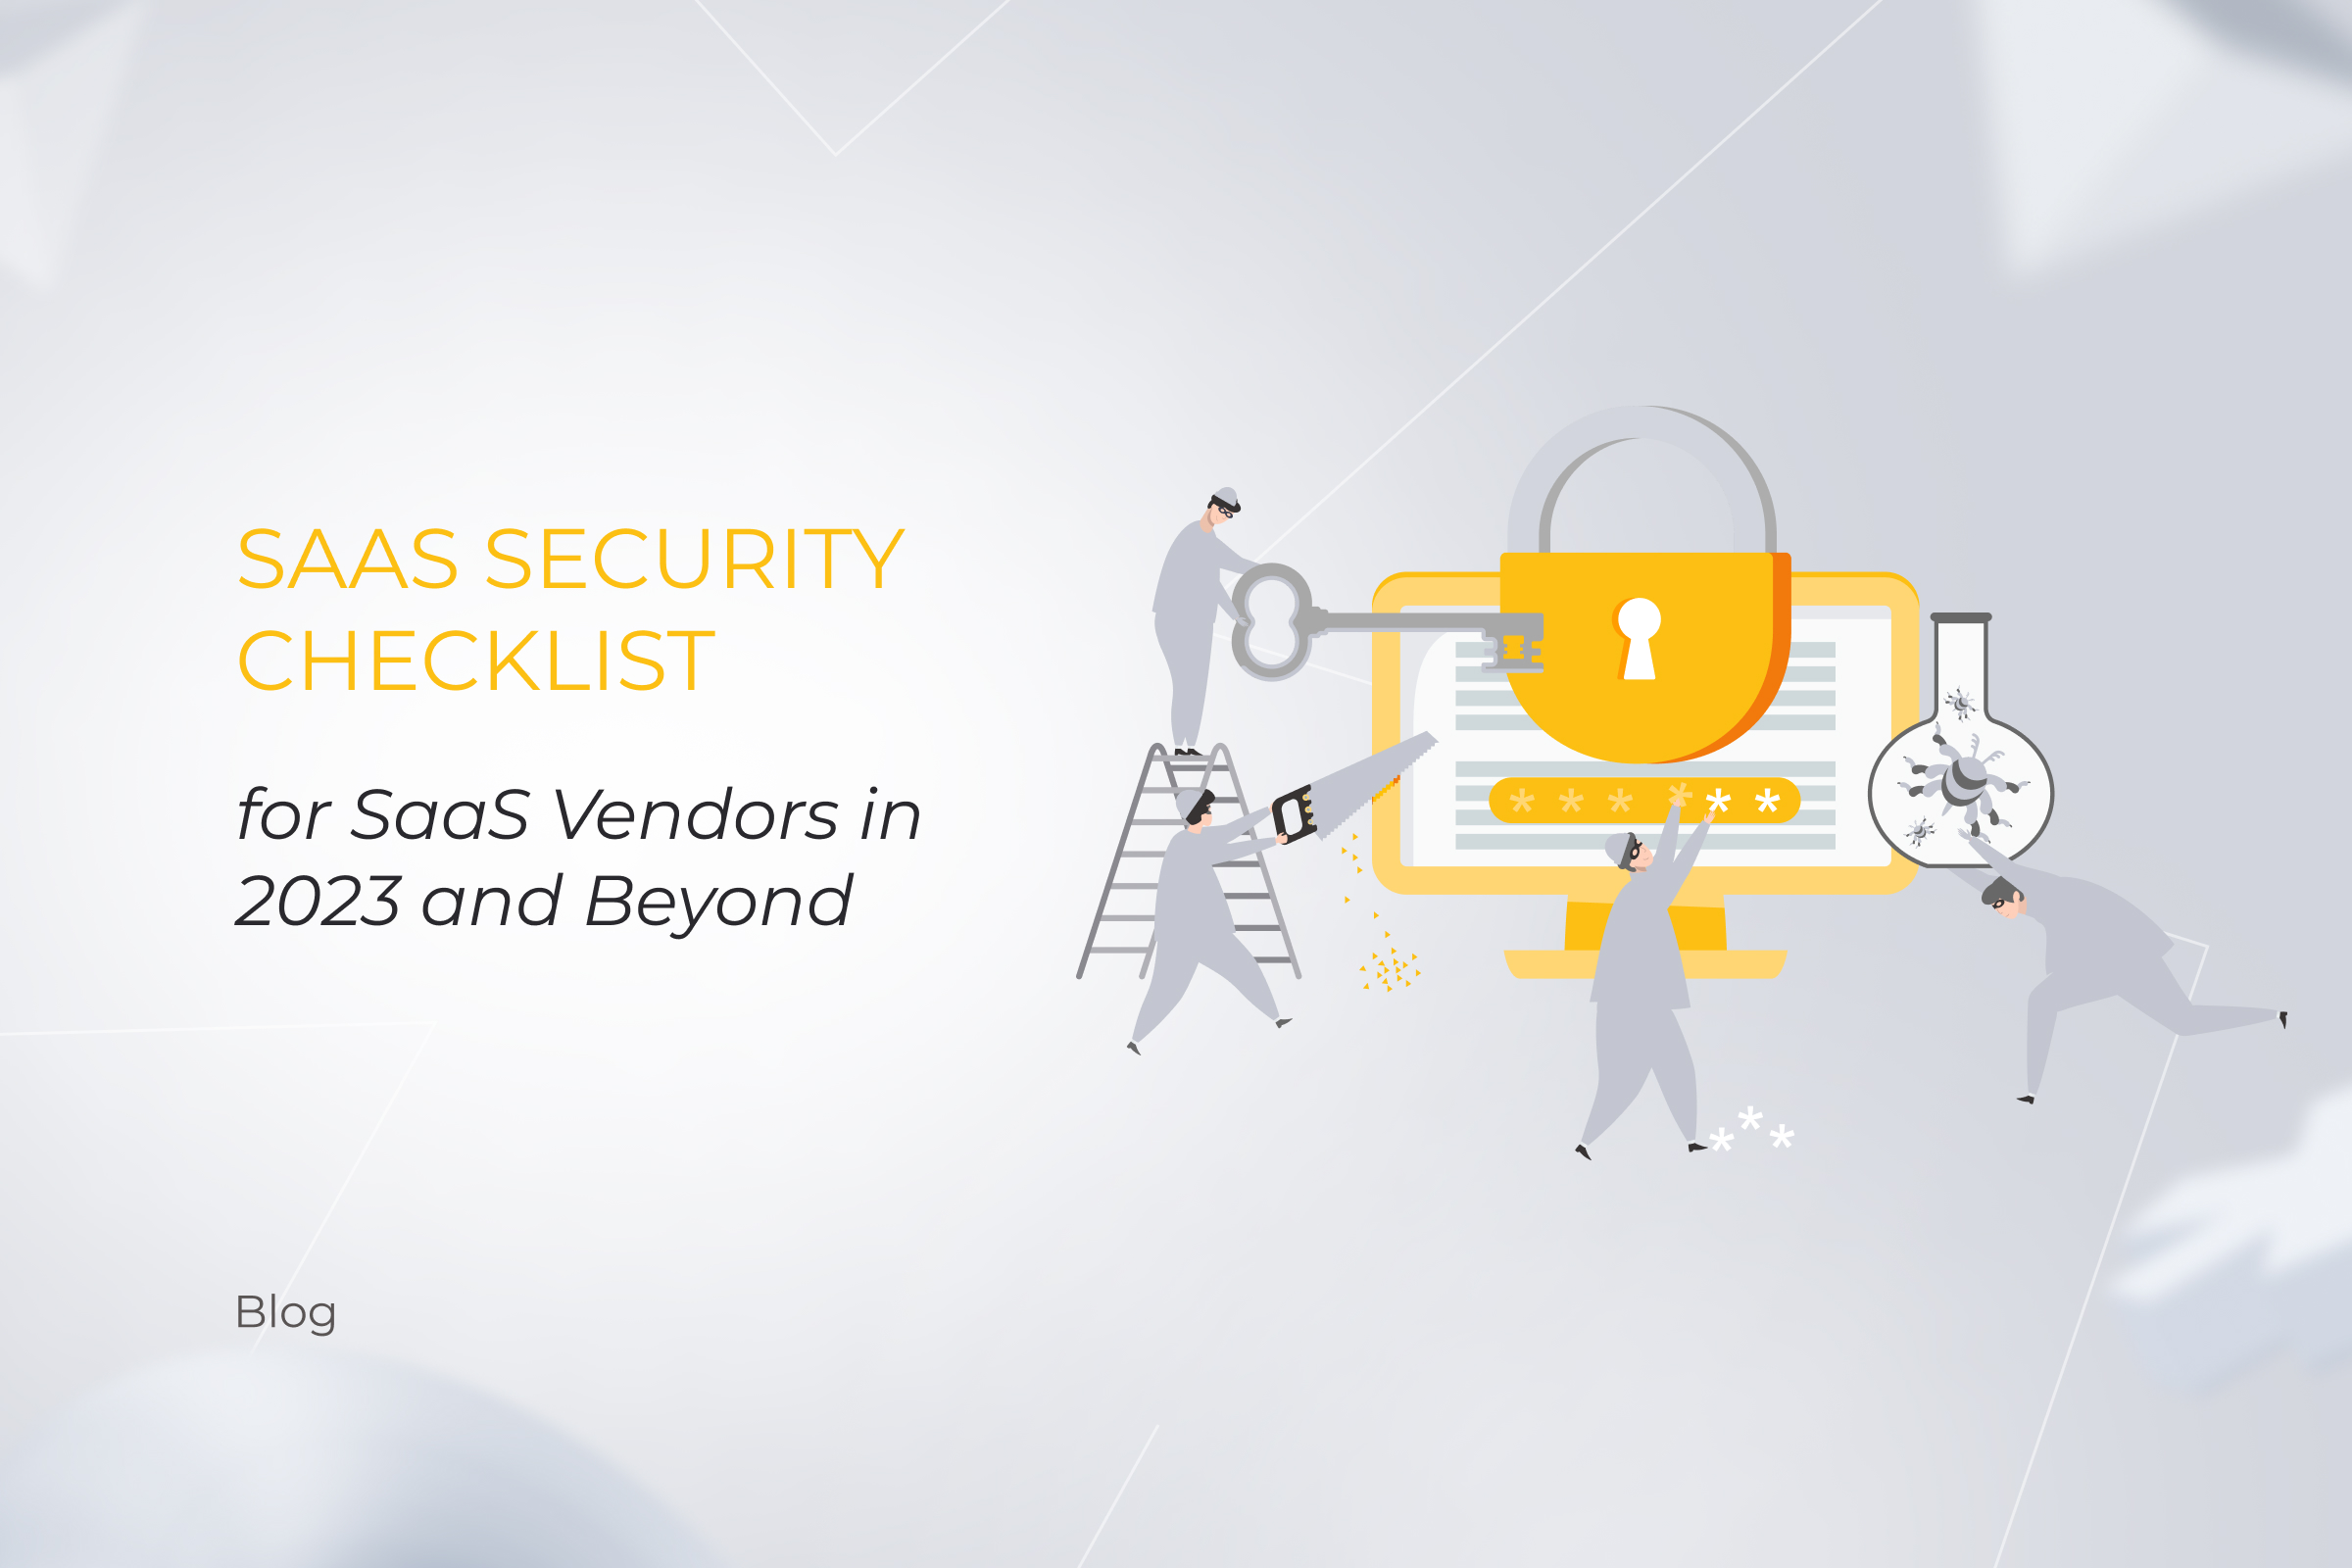 SaaS Security Checklist for SaaS Vendors in 2023 and Beyond